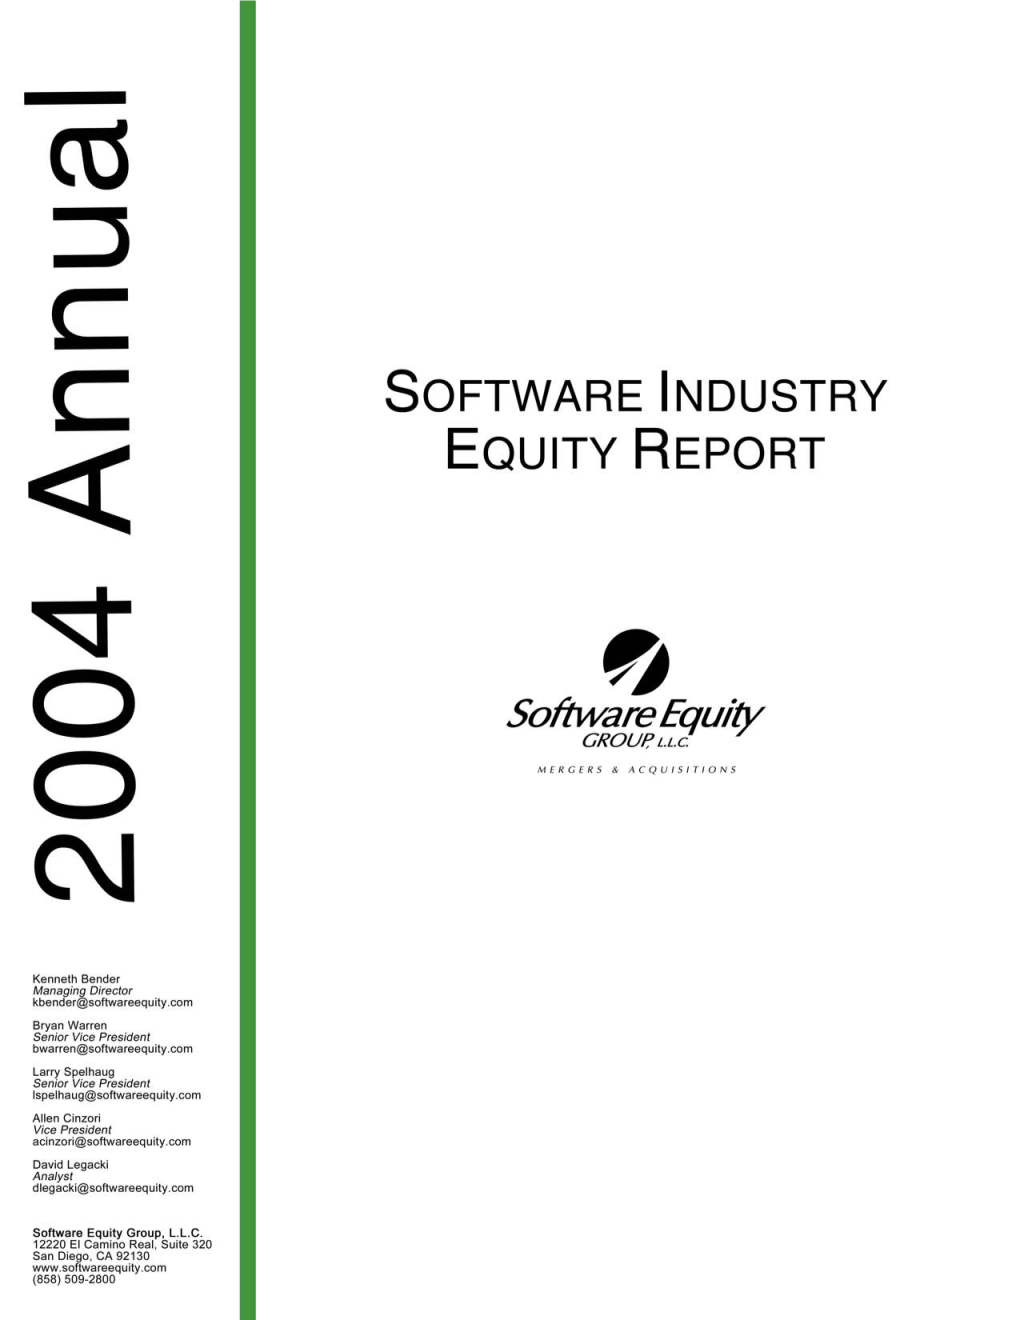 2004 Software Industry Equity Report.Pdf